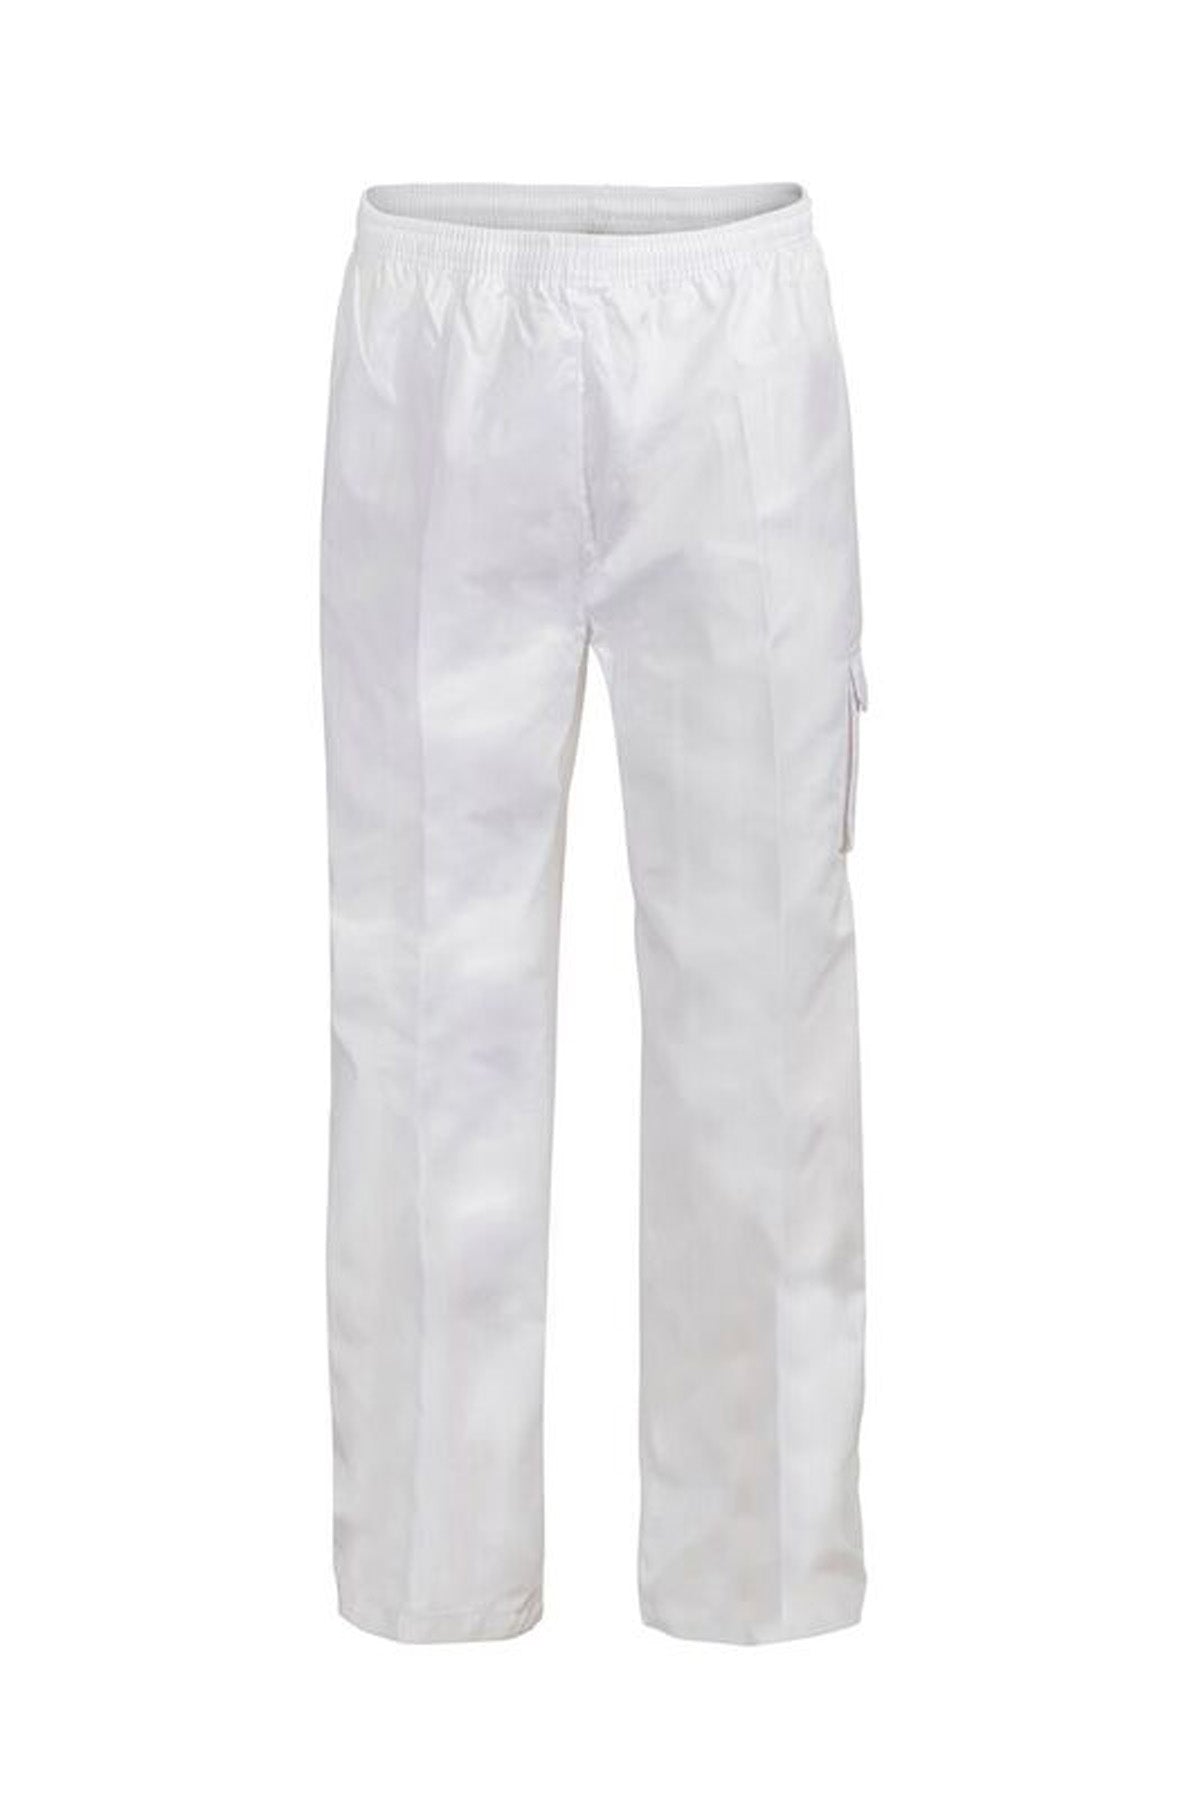 Chefs Drawstring Cargo Pant - made by ChefsCraft